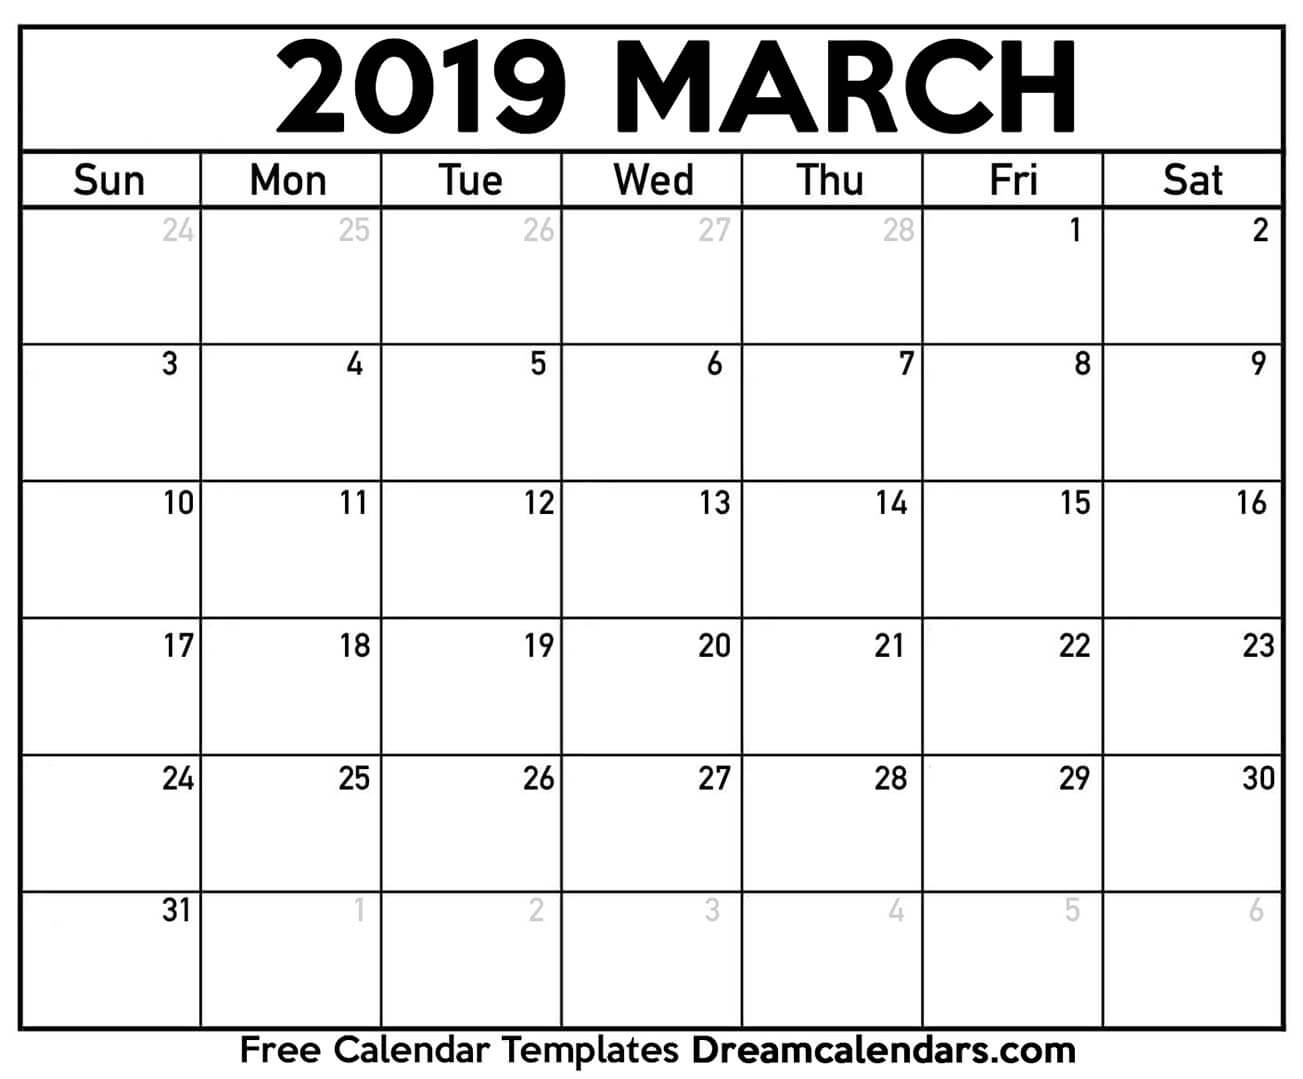 March 2019 Calendar Free Printable with Holidays and Observances